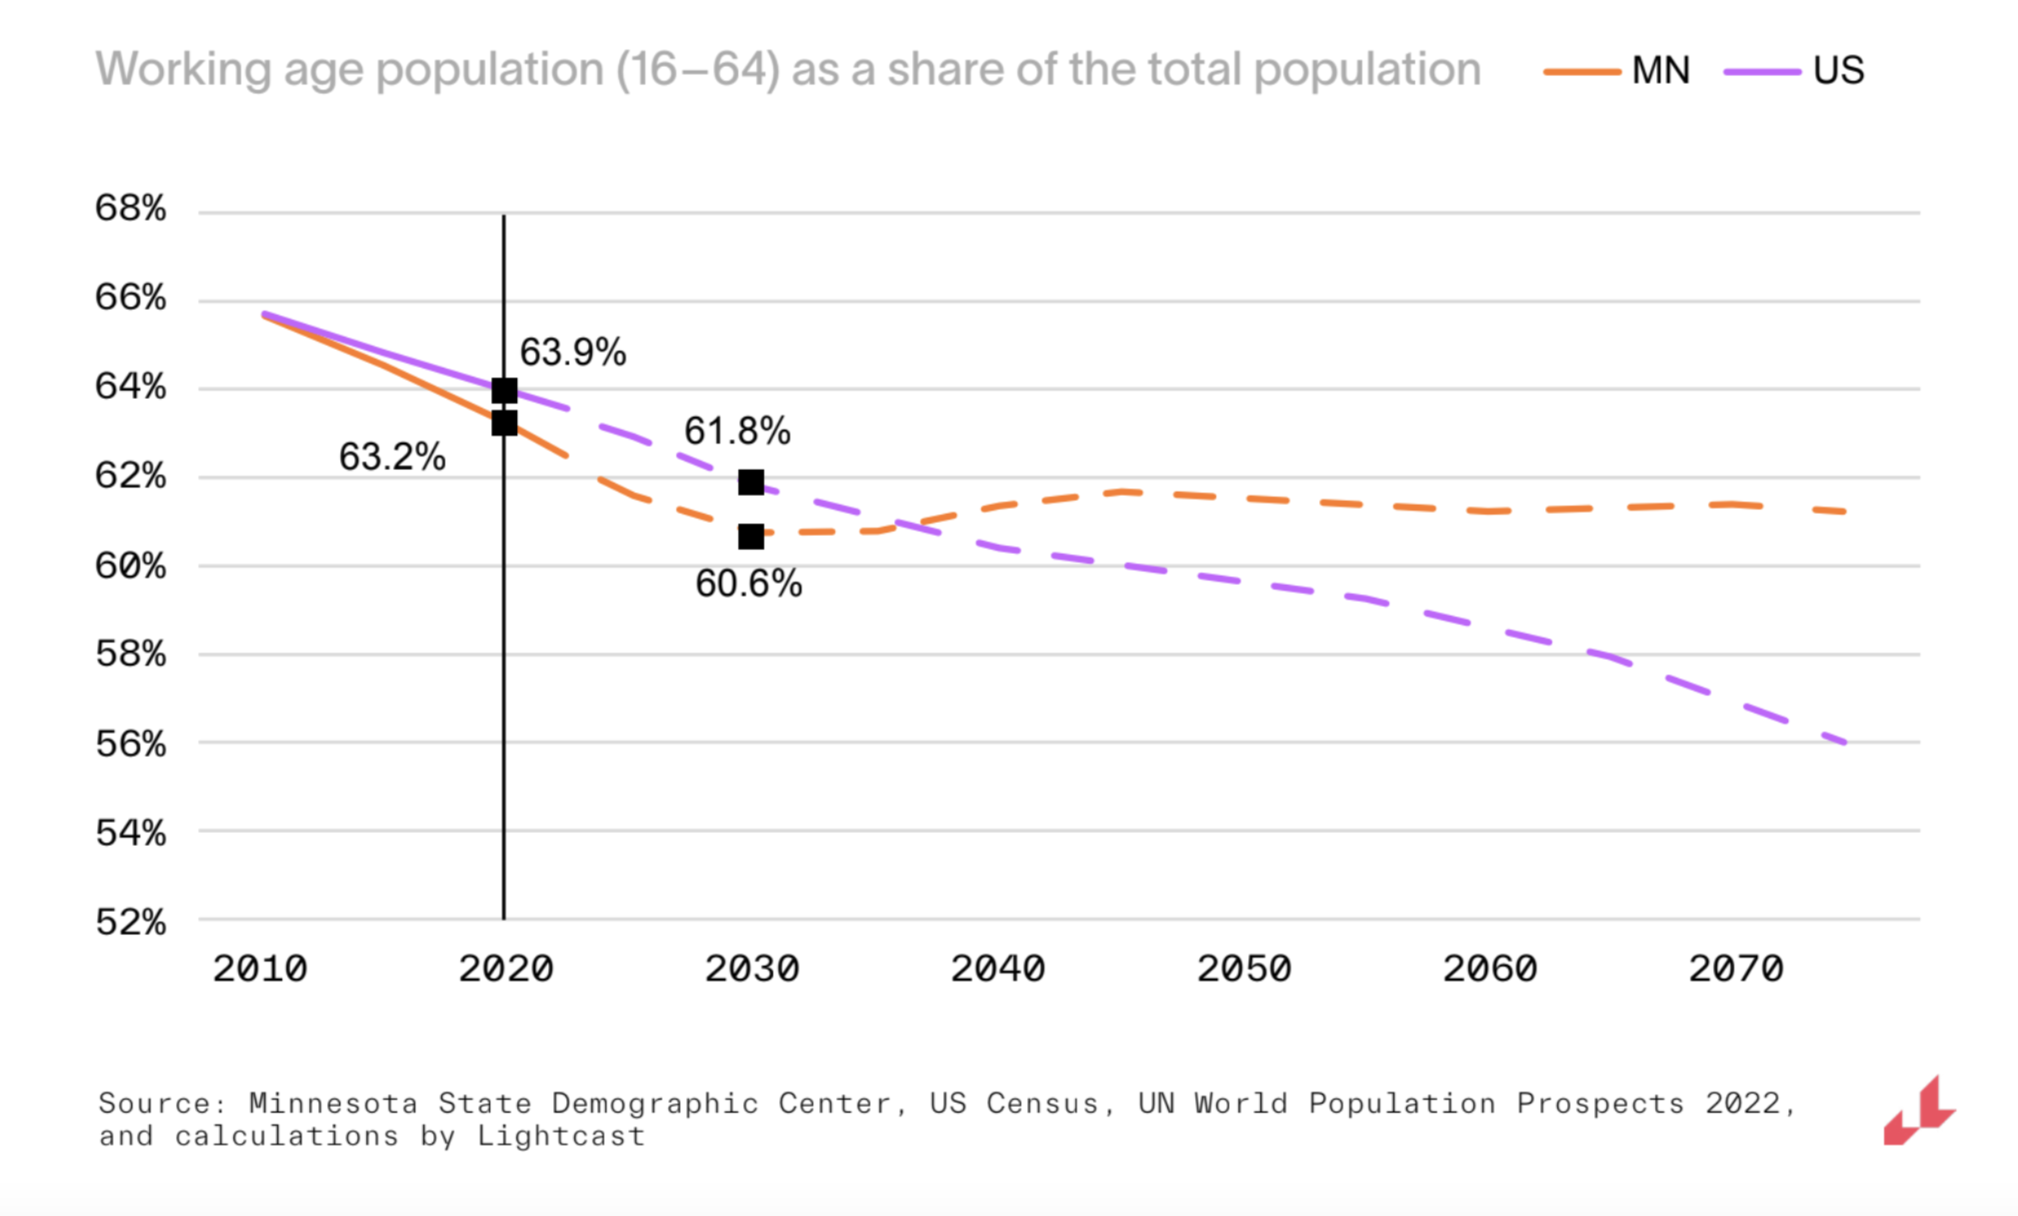 working age population in MN